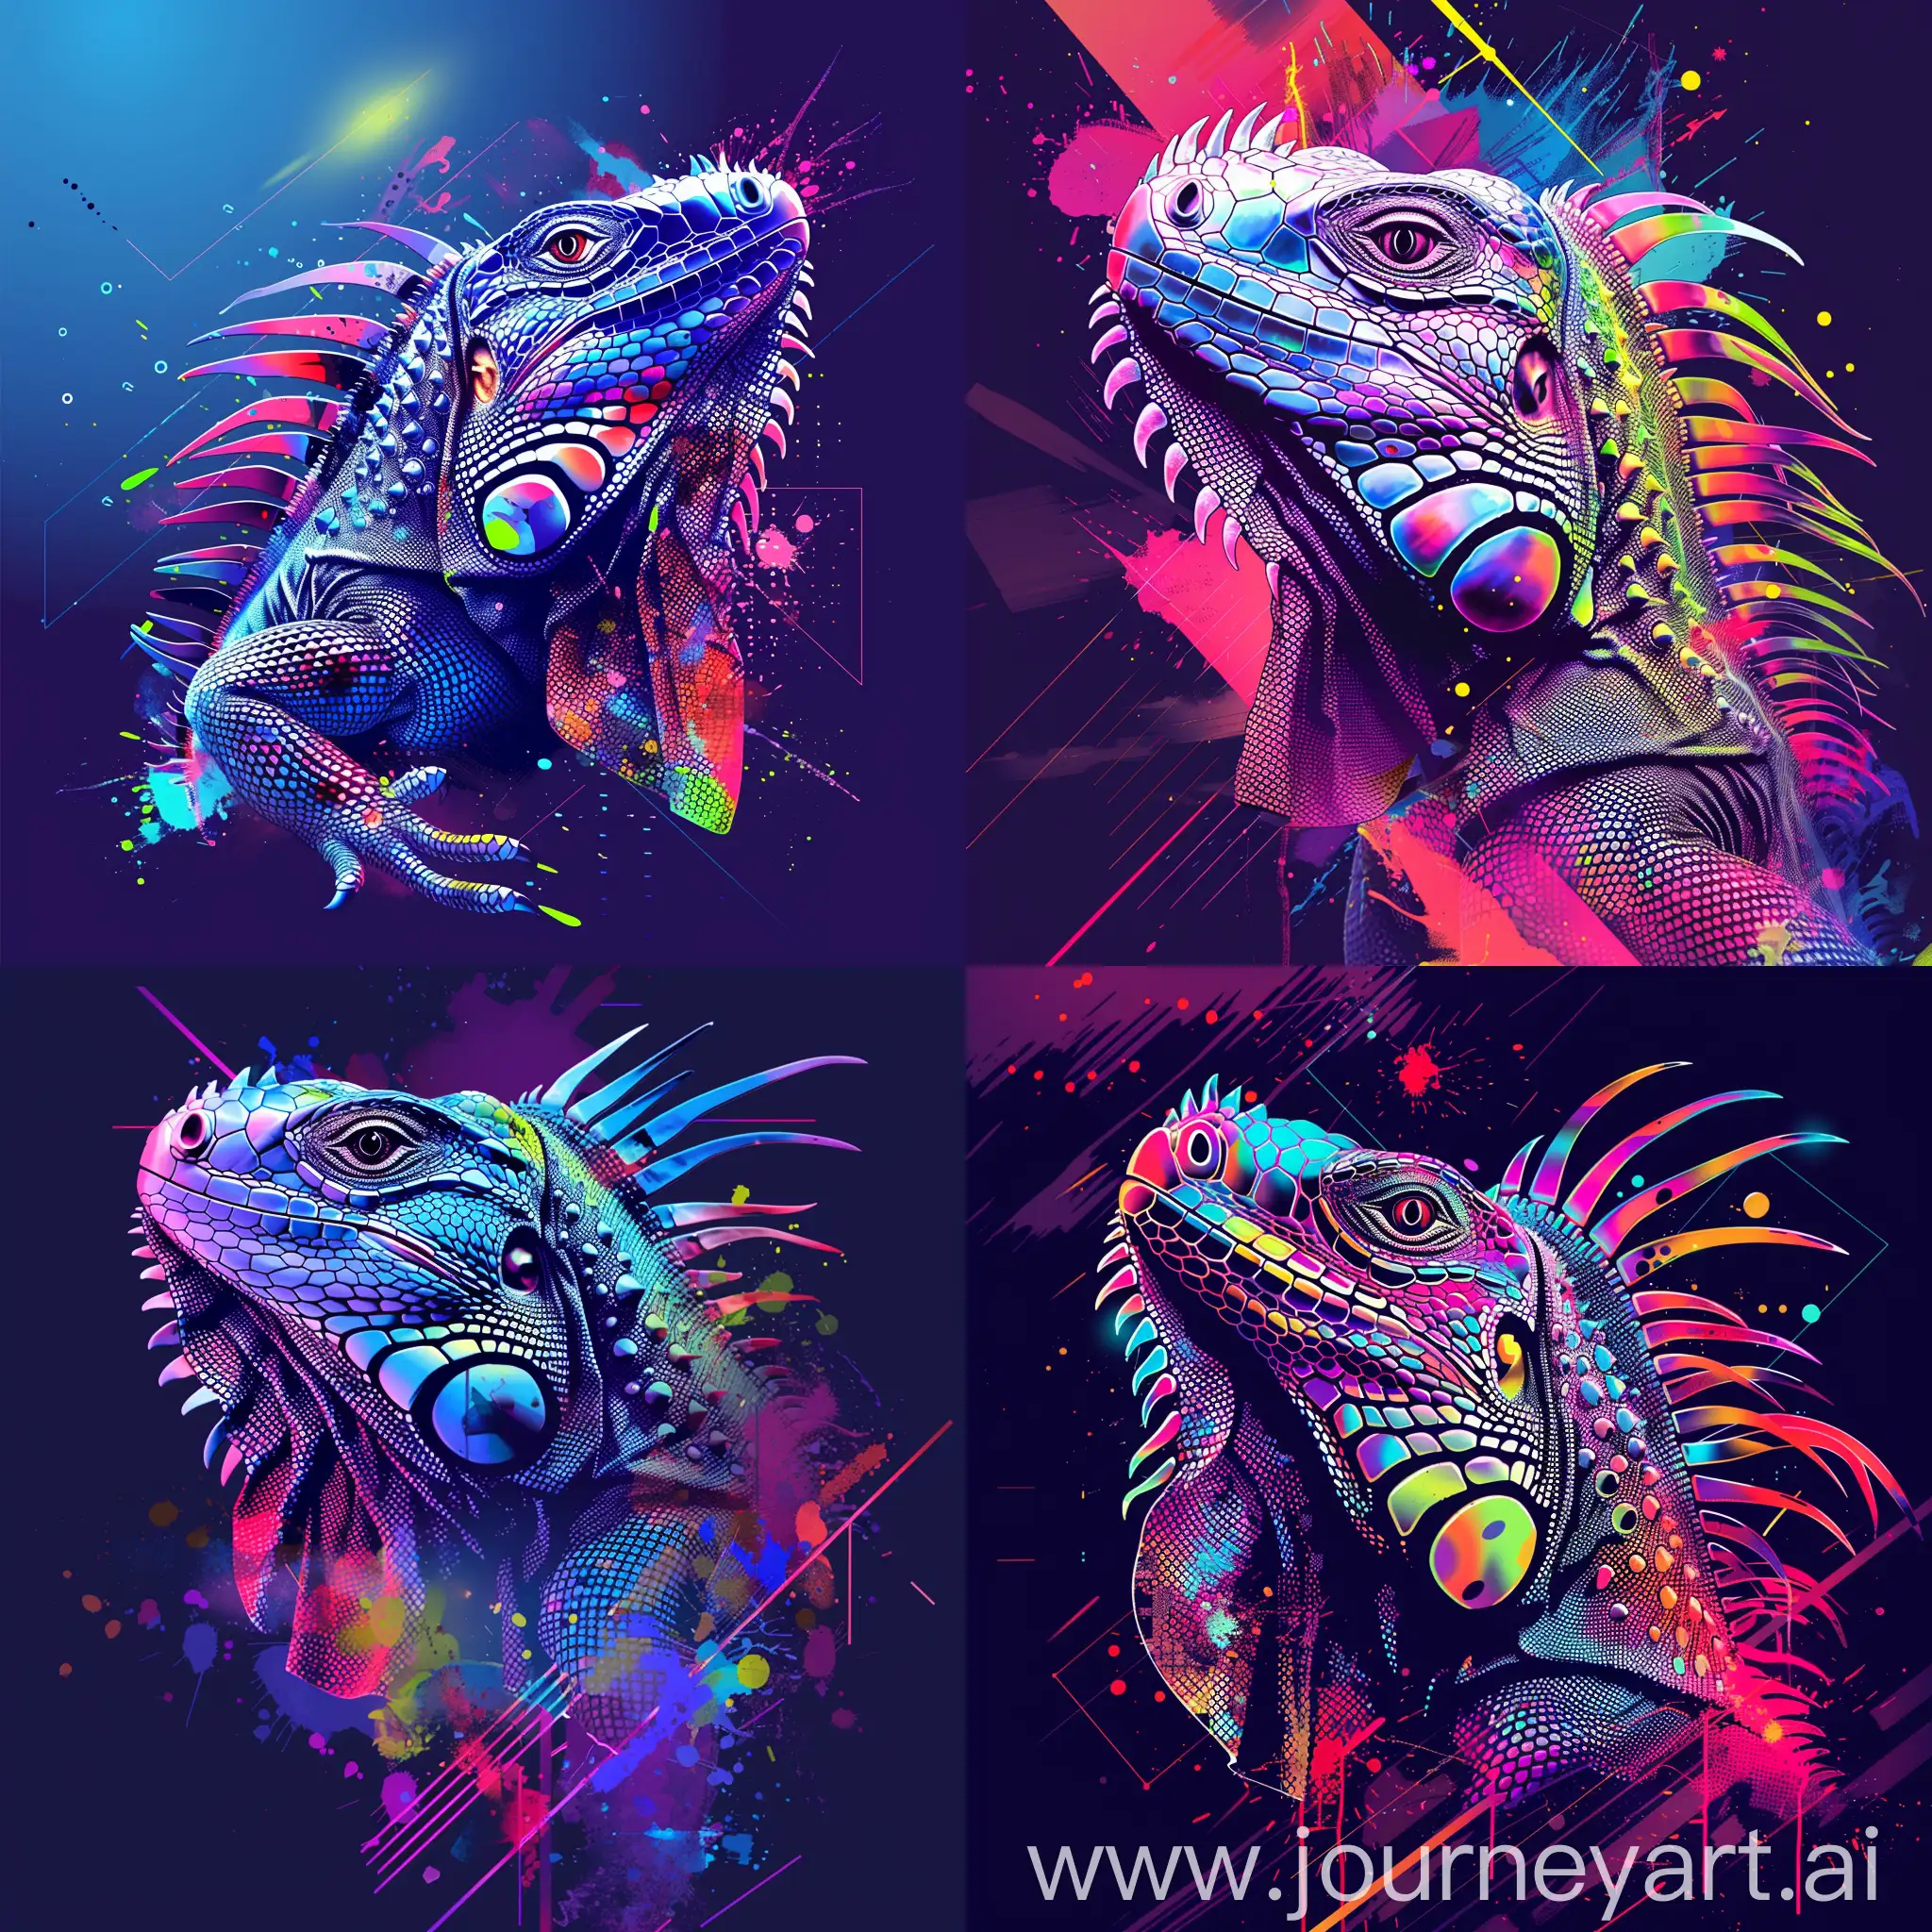 illustration of iguana's head in abstract digital art, created with a mix of geometric shapes and splashes of paint, in bright neon colors, high quality details